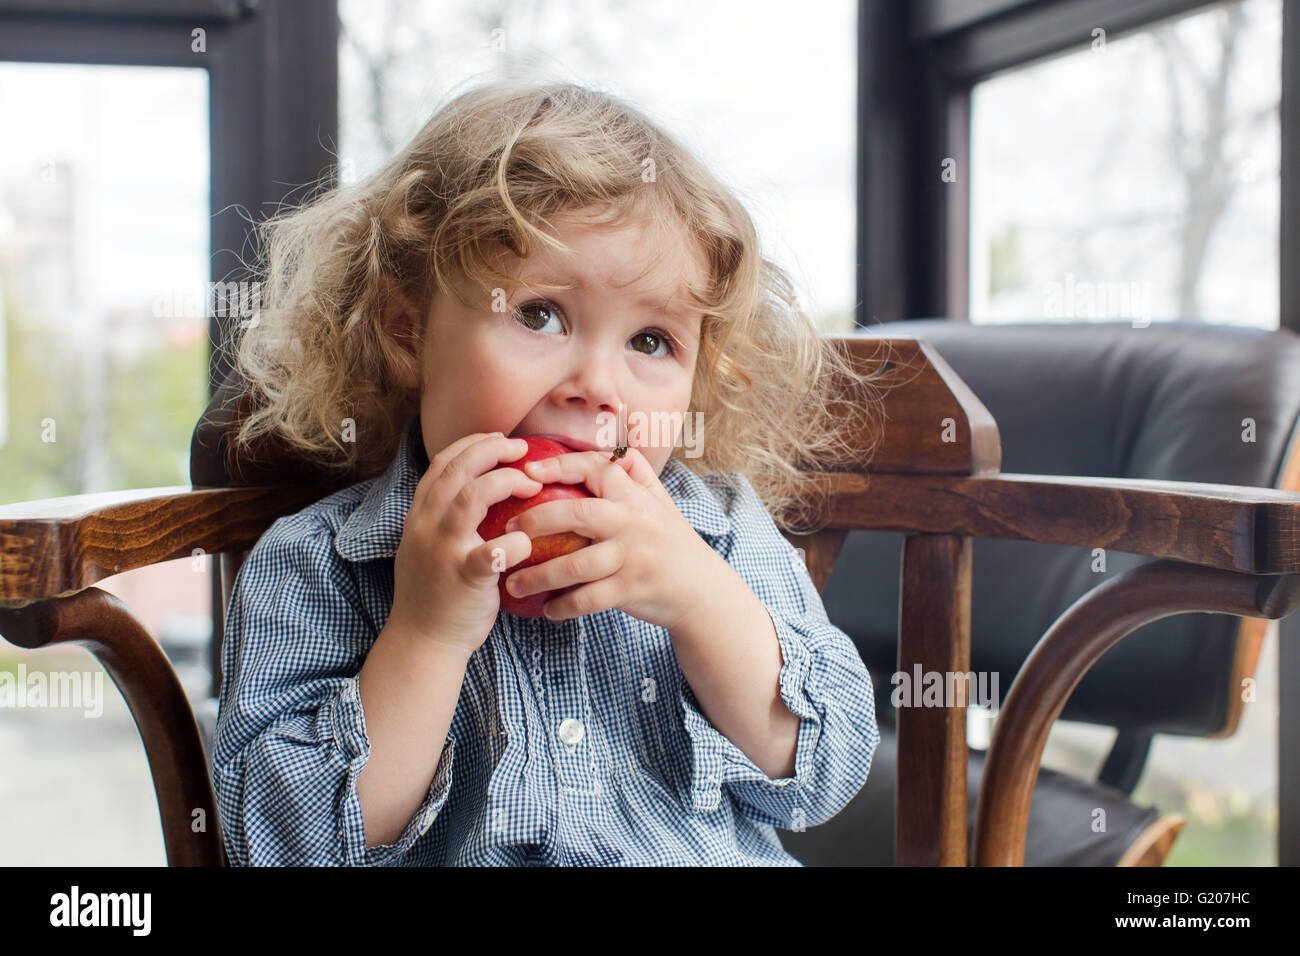 little child eating red apple indoors Stock Photo